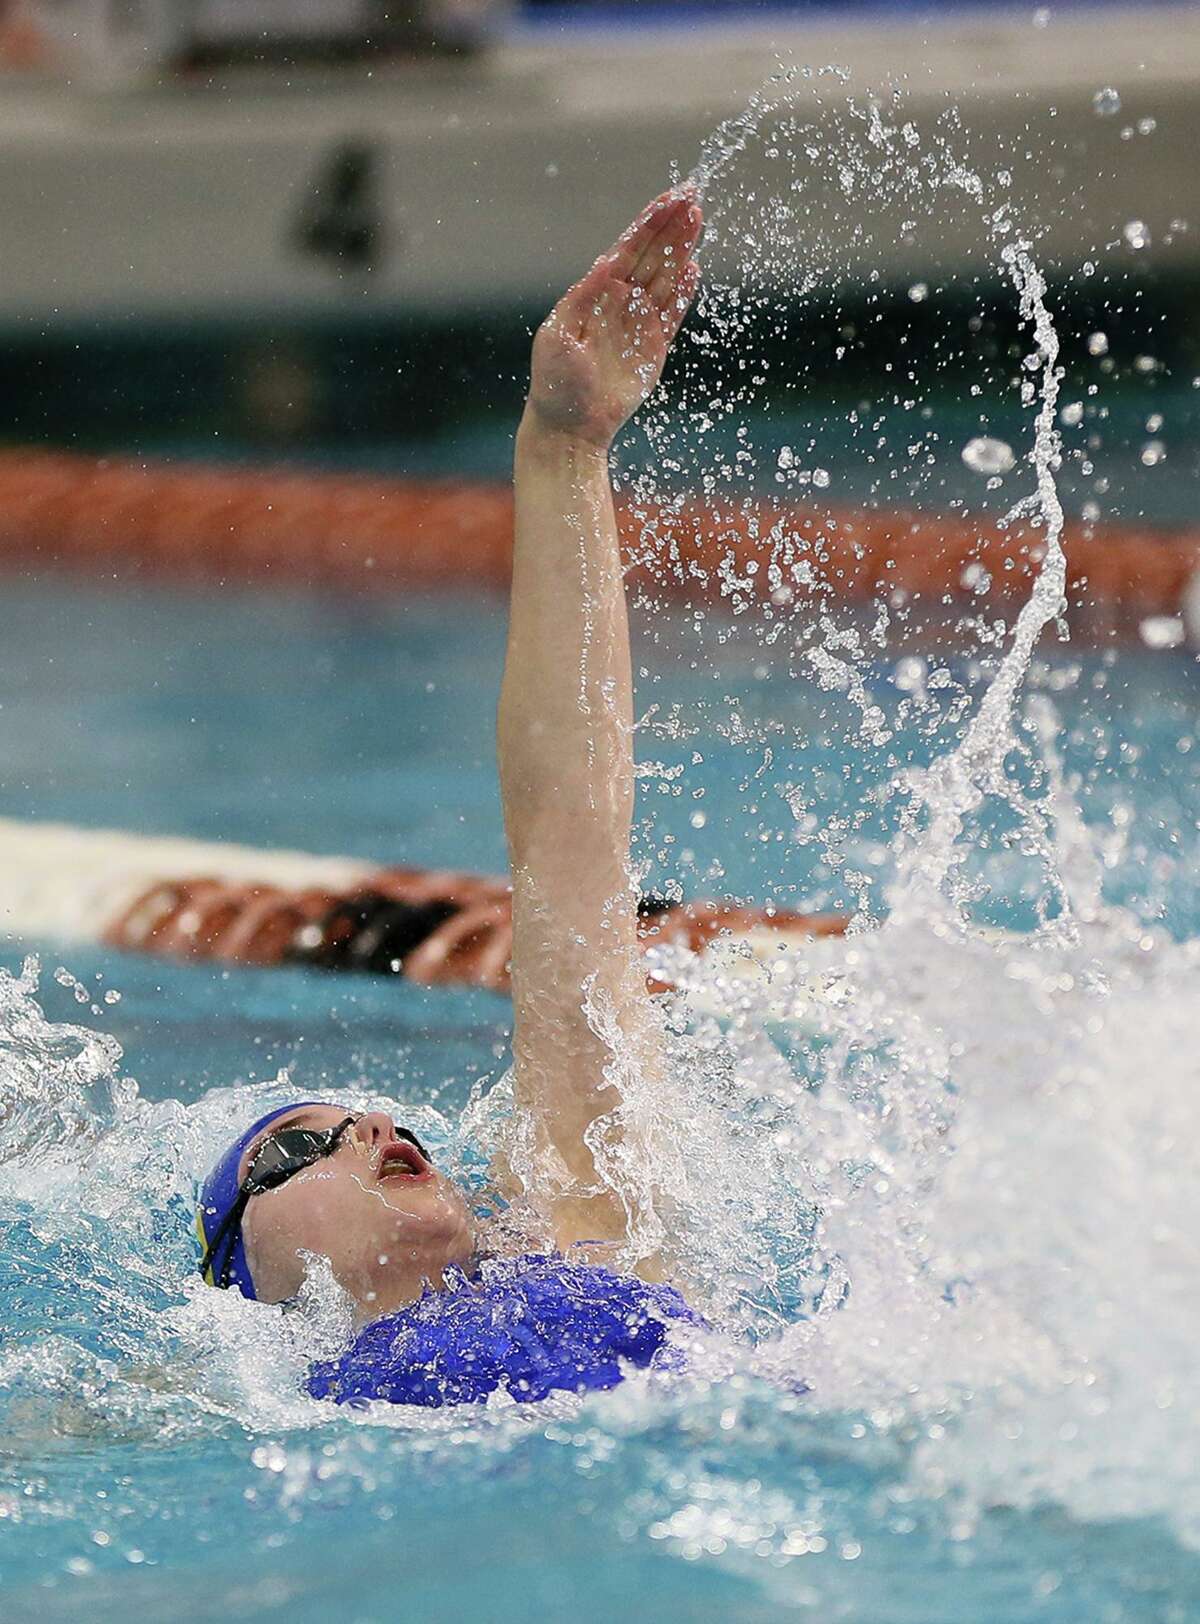 Alamo Heights' Lila Foote swims in the girls 100-yard backstroke during the UIL Class 5A state championship at the Jamail Swimming Center at the University of Texas at Austin on Saturday, Feb. 16, 2019. Foote finished fifth in the event with a time of 57.87 seconds.